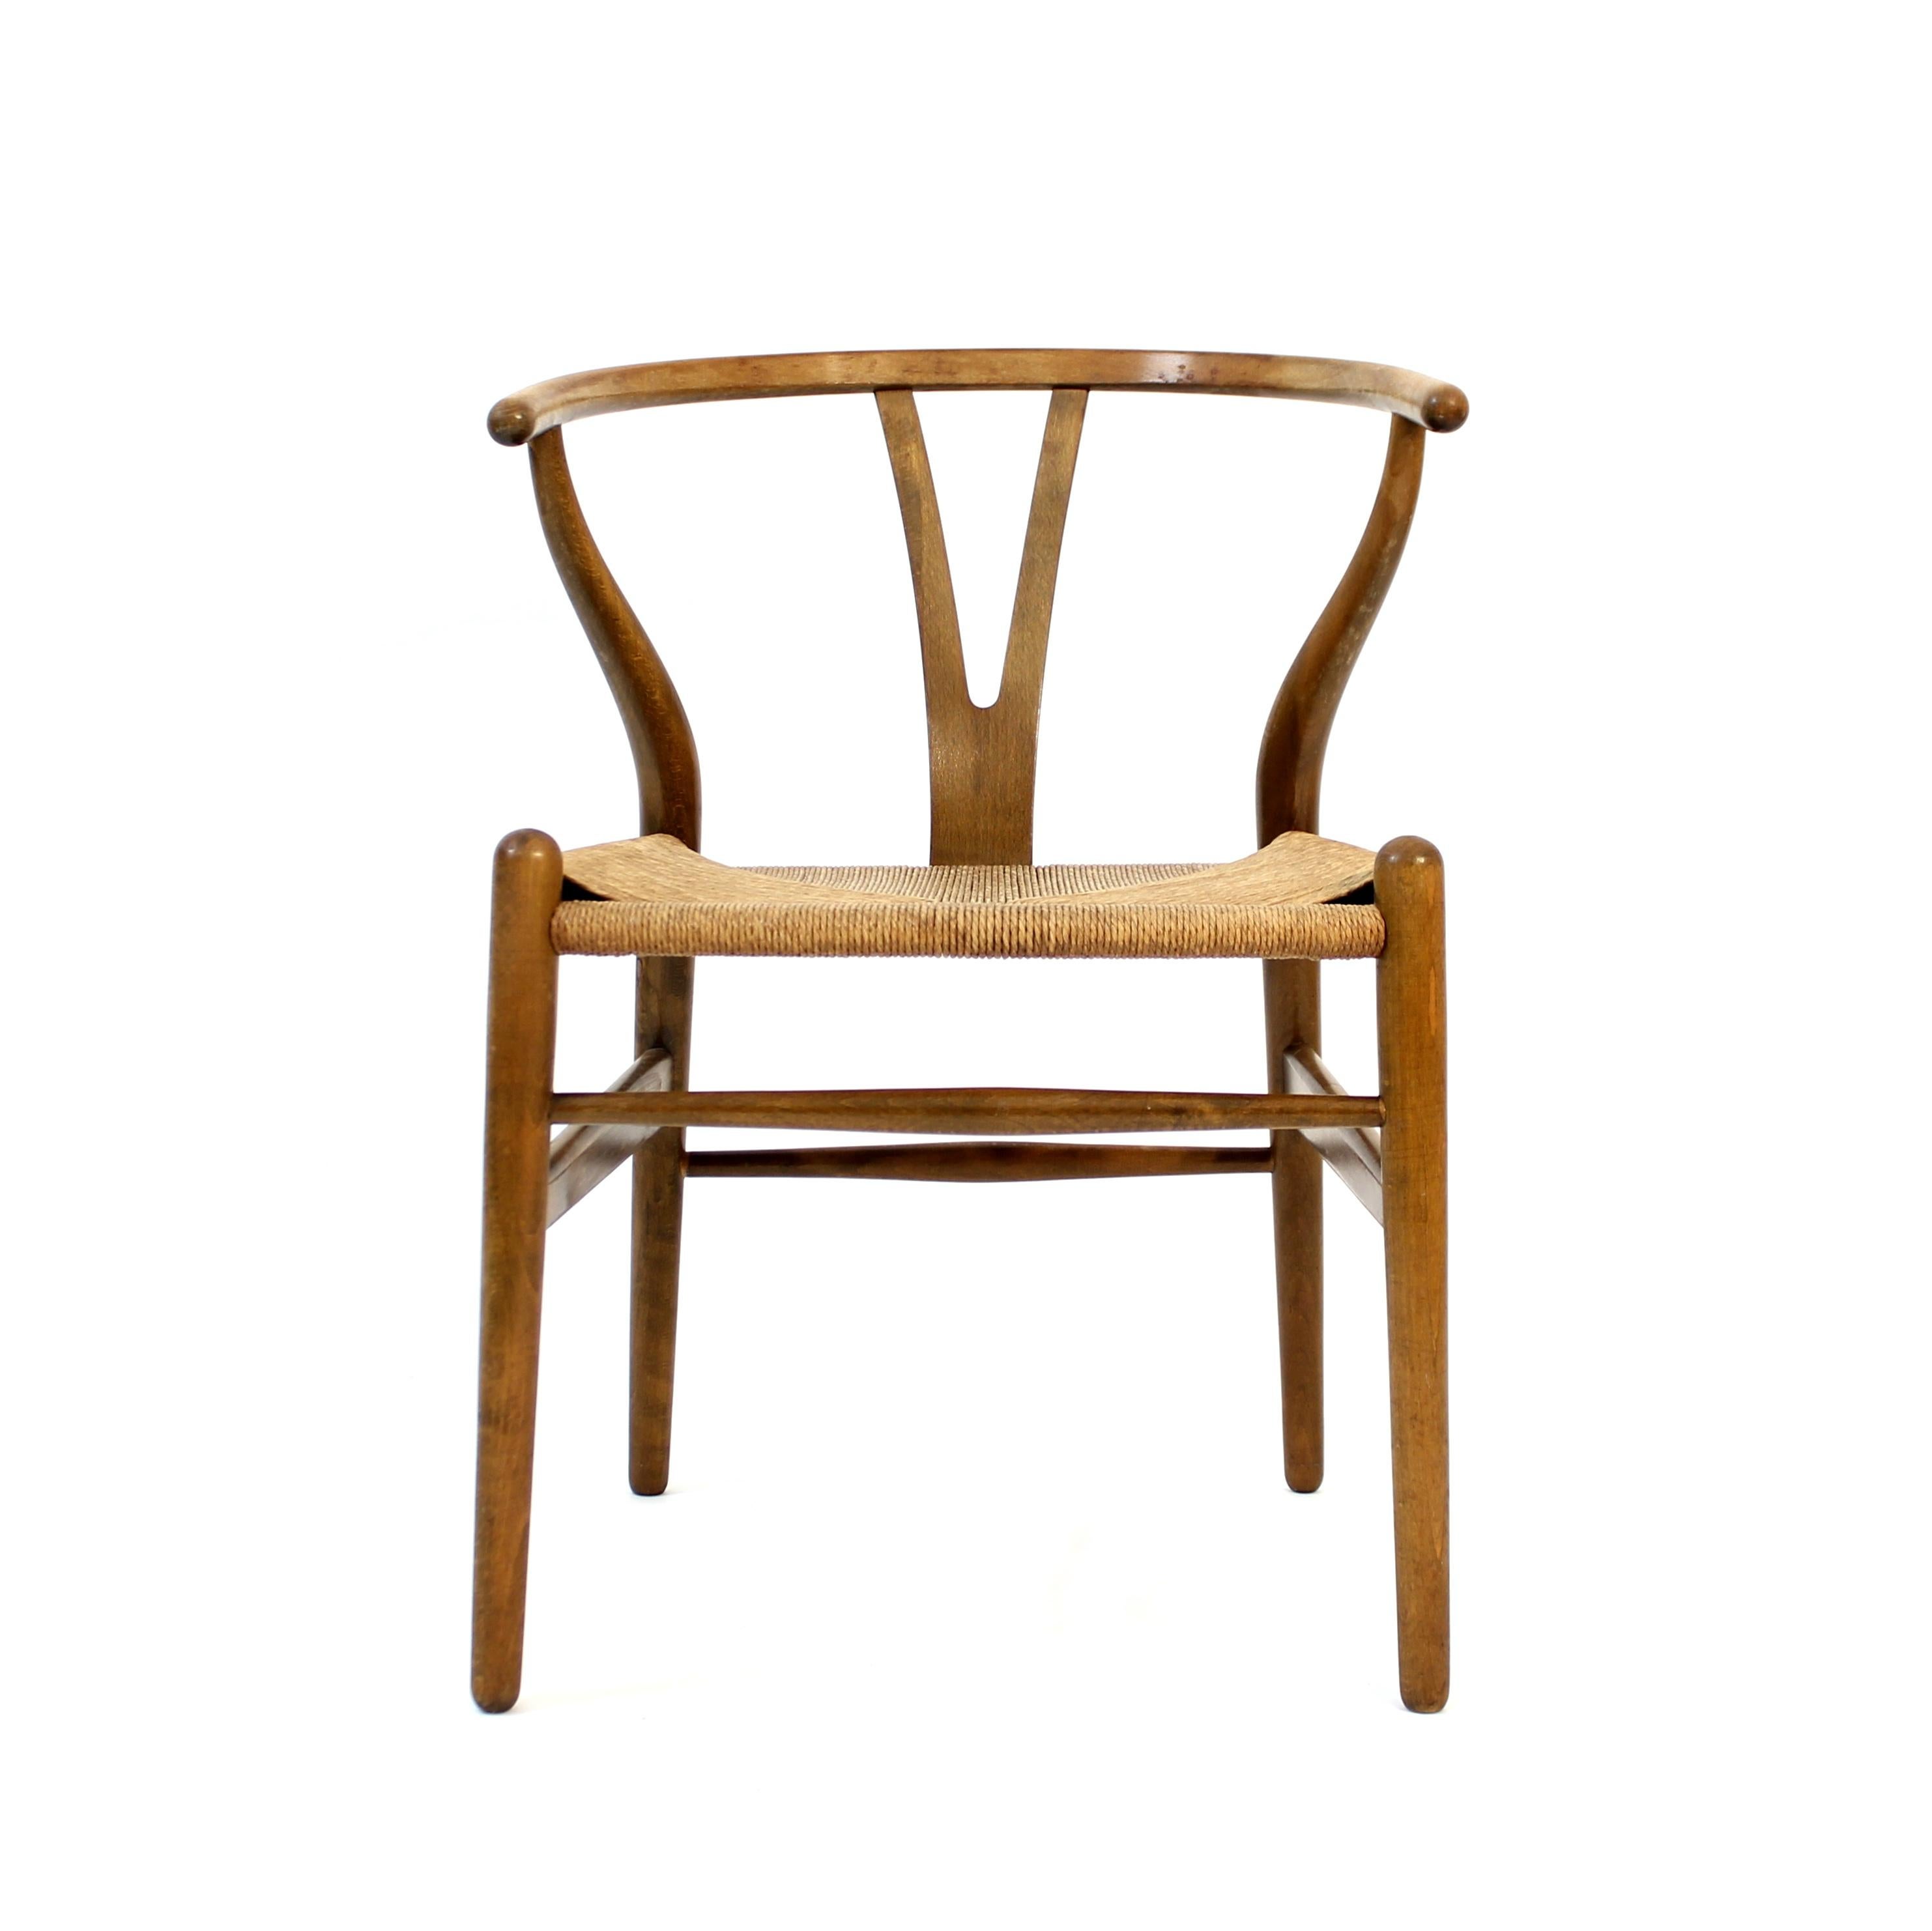 Early example of the iconic Wishbone chair (or the Y-chair as it also is called), designed in 1949 by Hans J. Wegner for Carl Hansen & Søn and was put into production from 1950 and forward. The official model name is CH24. The frame on this early